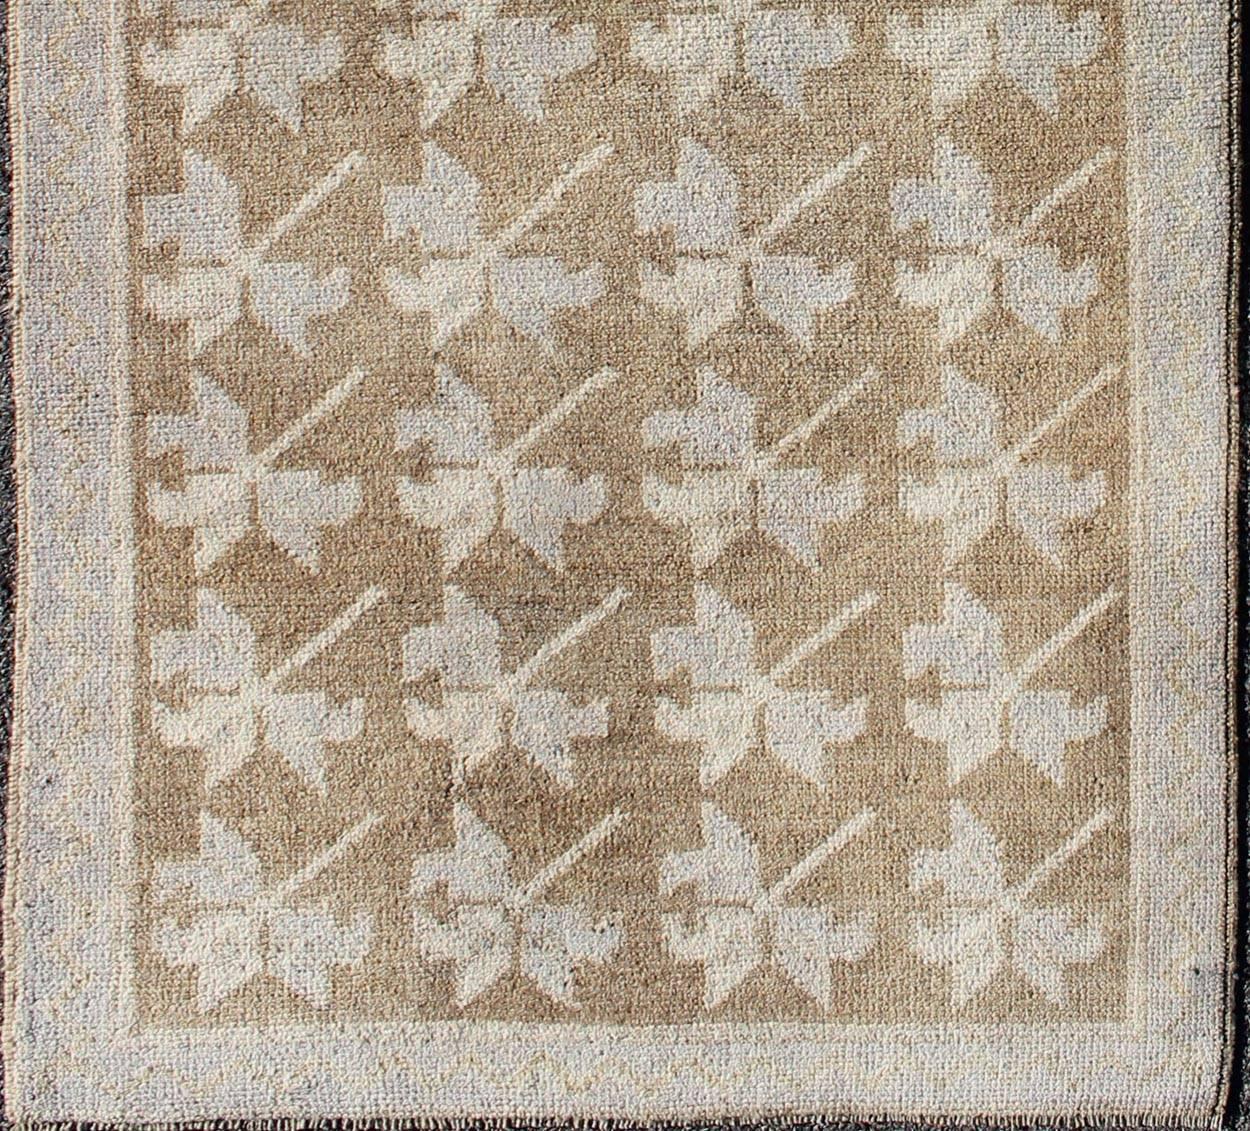 Set on a camel and brown background and accented by neutral cream and light blue, this tribal Turkish Oushak rug showcases five geometric patterns that stretch throughout the entire field of the rug. A multi-tiered border with repeating geometric